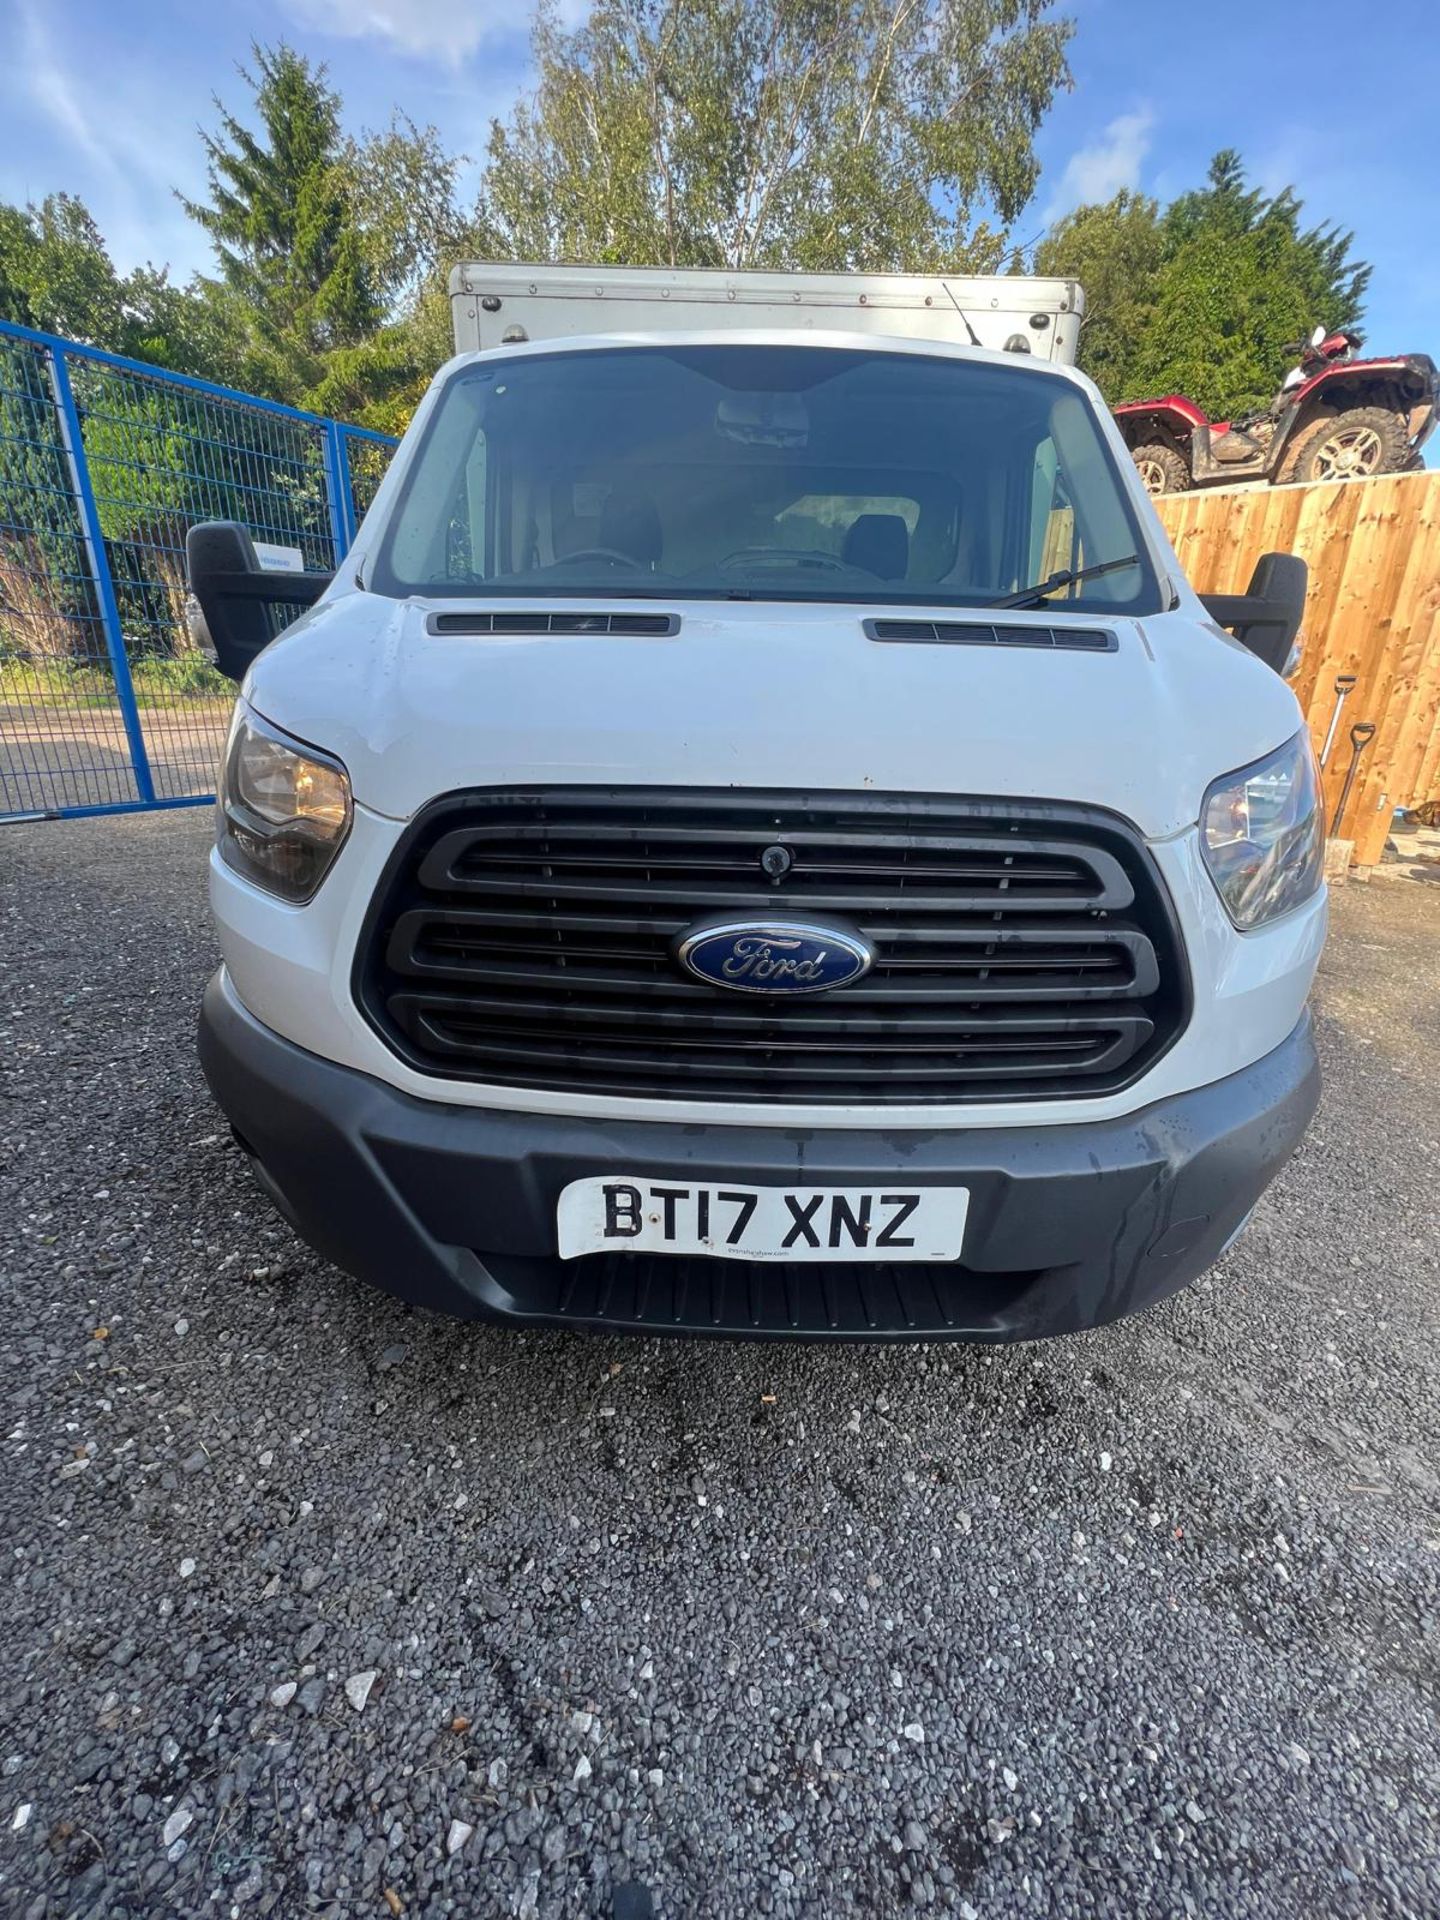 FORD TRANSIT BOX VAN 2017 LUTON EURO6 LWB 6 SPEED MANUAL 1COMPANY OWNER FROM NEW - Image 11 of 14